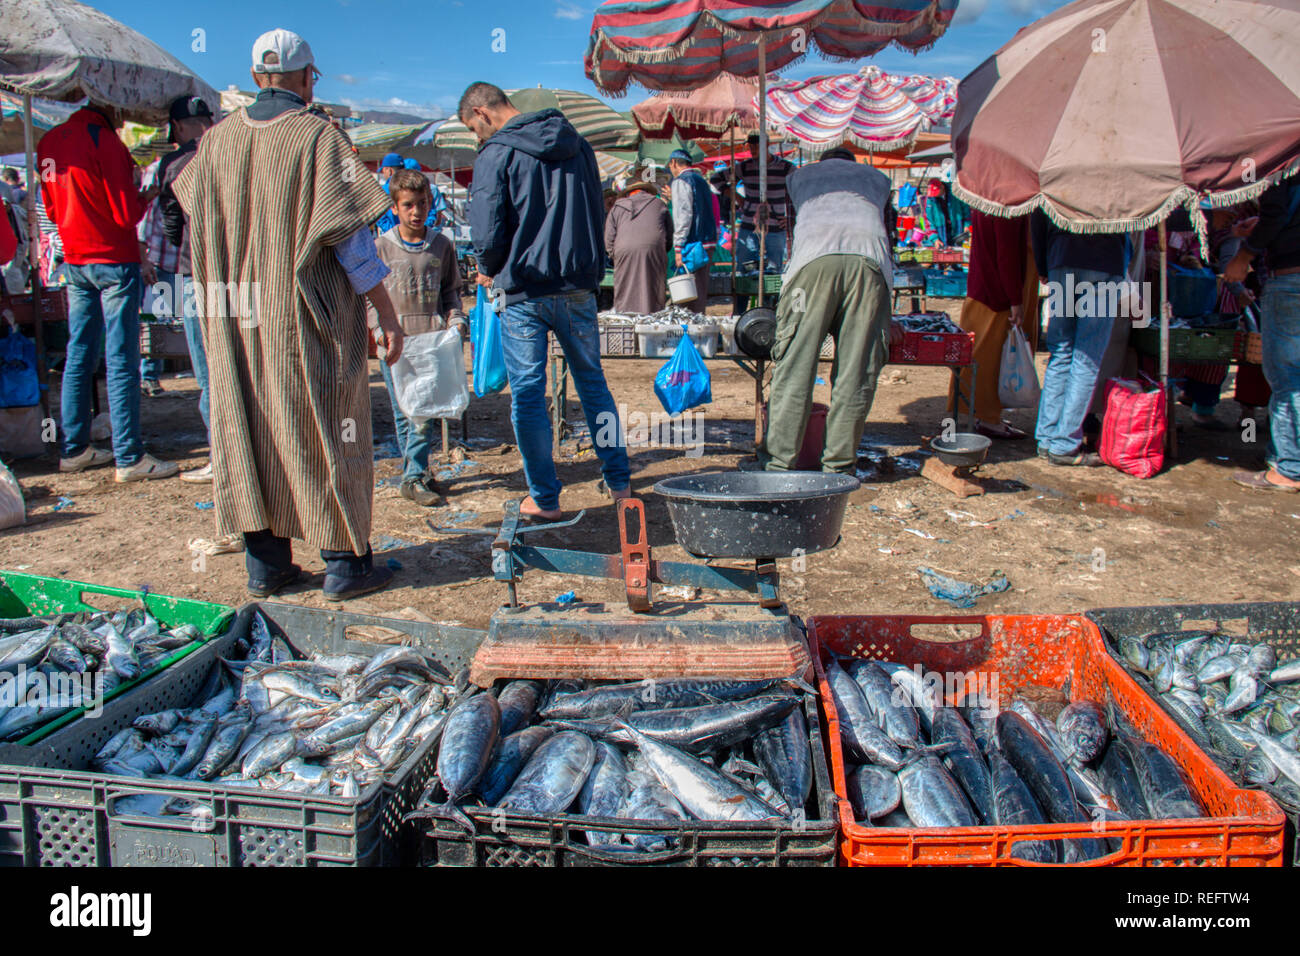 Oued Laou, Chefchaouen, Morocco - November 3, 2018: Fresh fish exposed for sale in the market that is established on Saturdays in the souk of Oued Lao Stock Photo